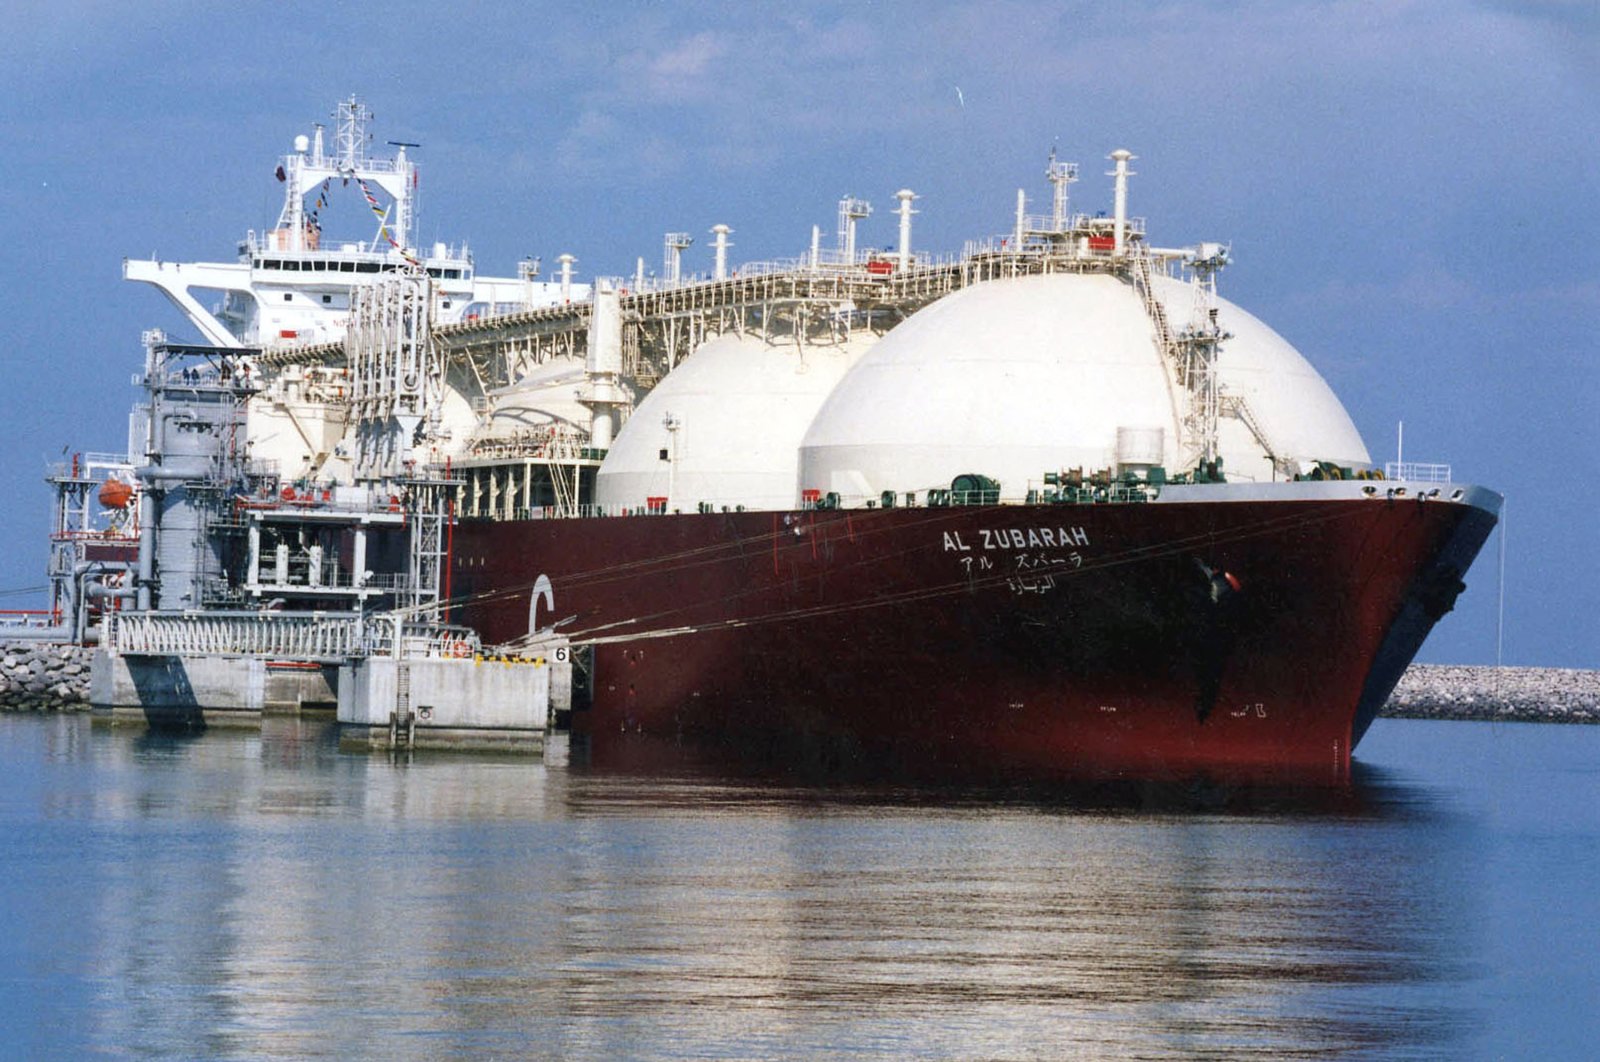 A Qatari liquid natural gas (LNG) tanker ship is loaded with LNG at Raslaffans Sea Port, northern Qatar, in this undated file photo. (AP Photo)